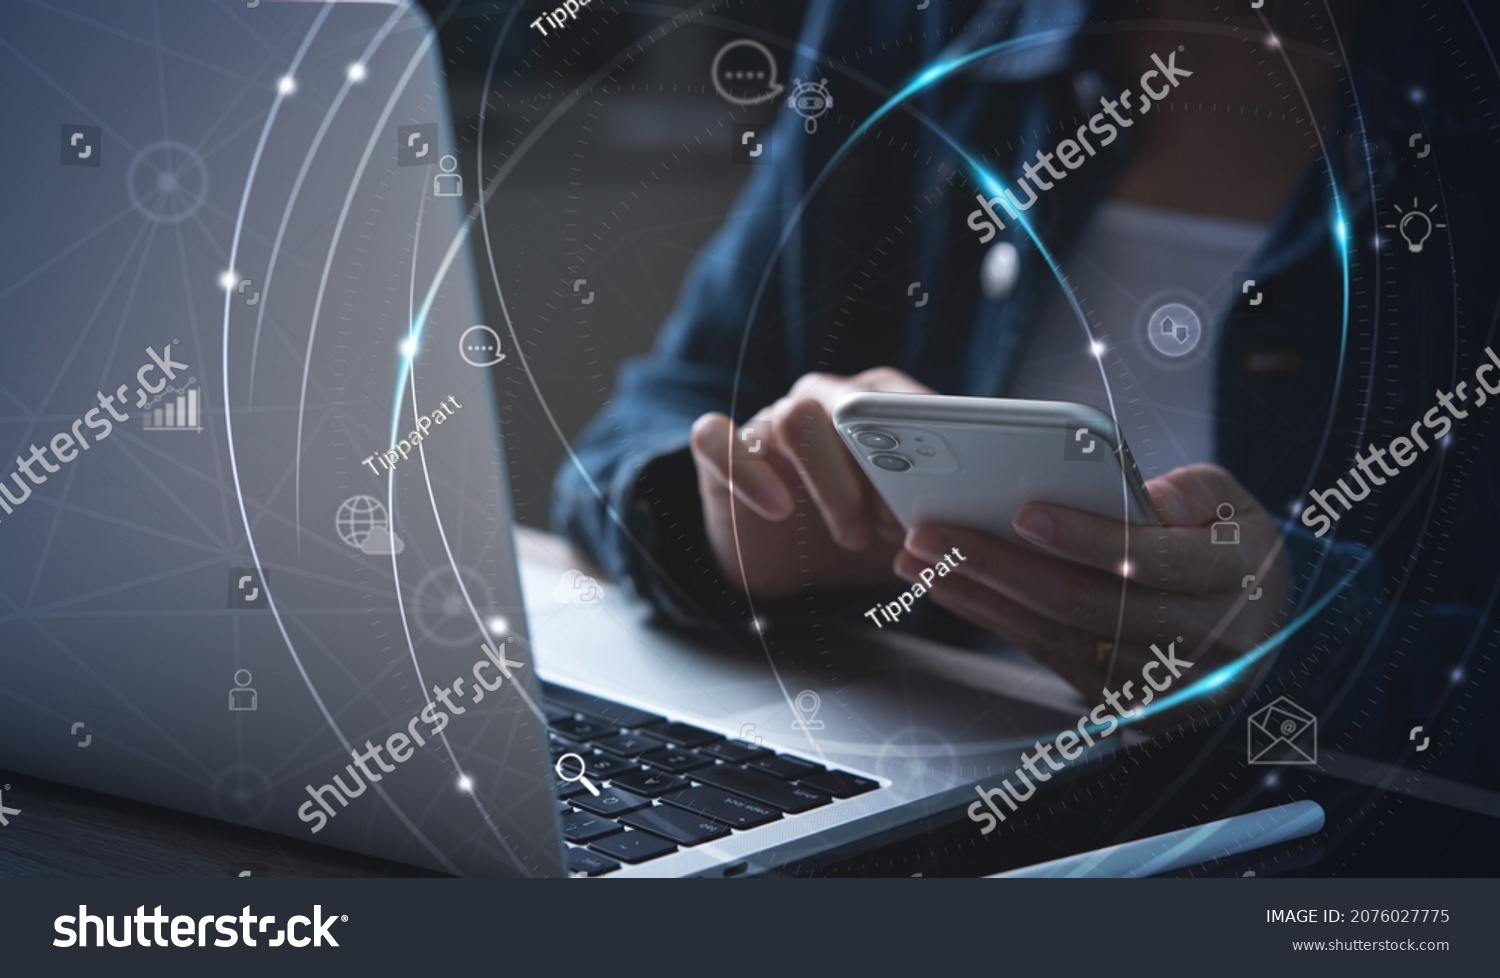 IoT, Internet of Things, online shopping, digital marketing, E-commerce, business and technology concept. Woman using mobile phone and laptop computer fro online shopping and banking via mobile app #2076027775